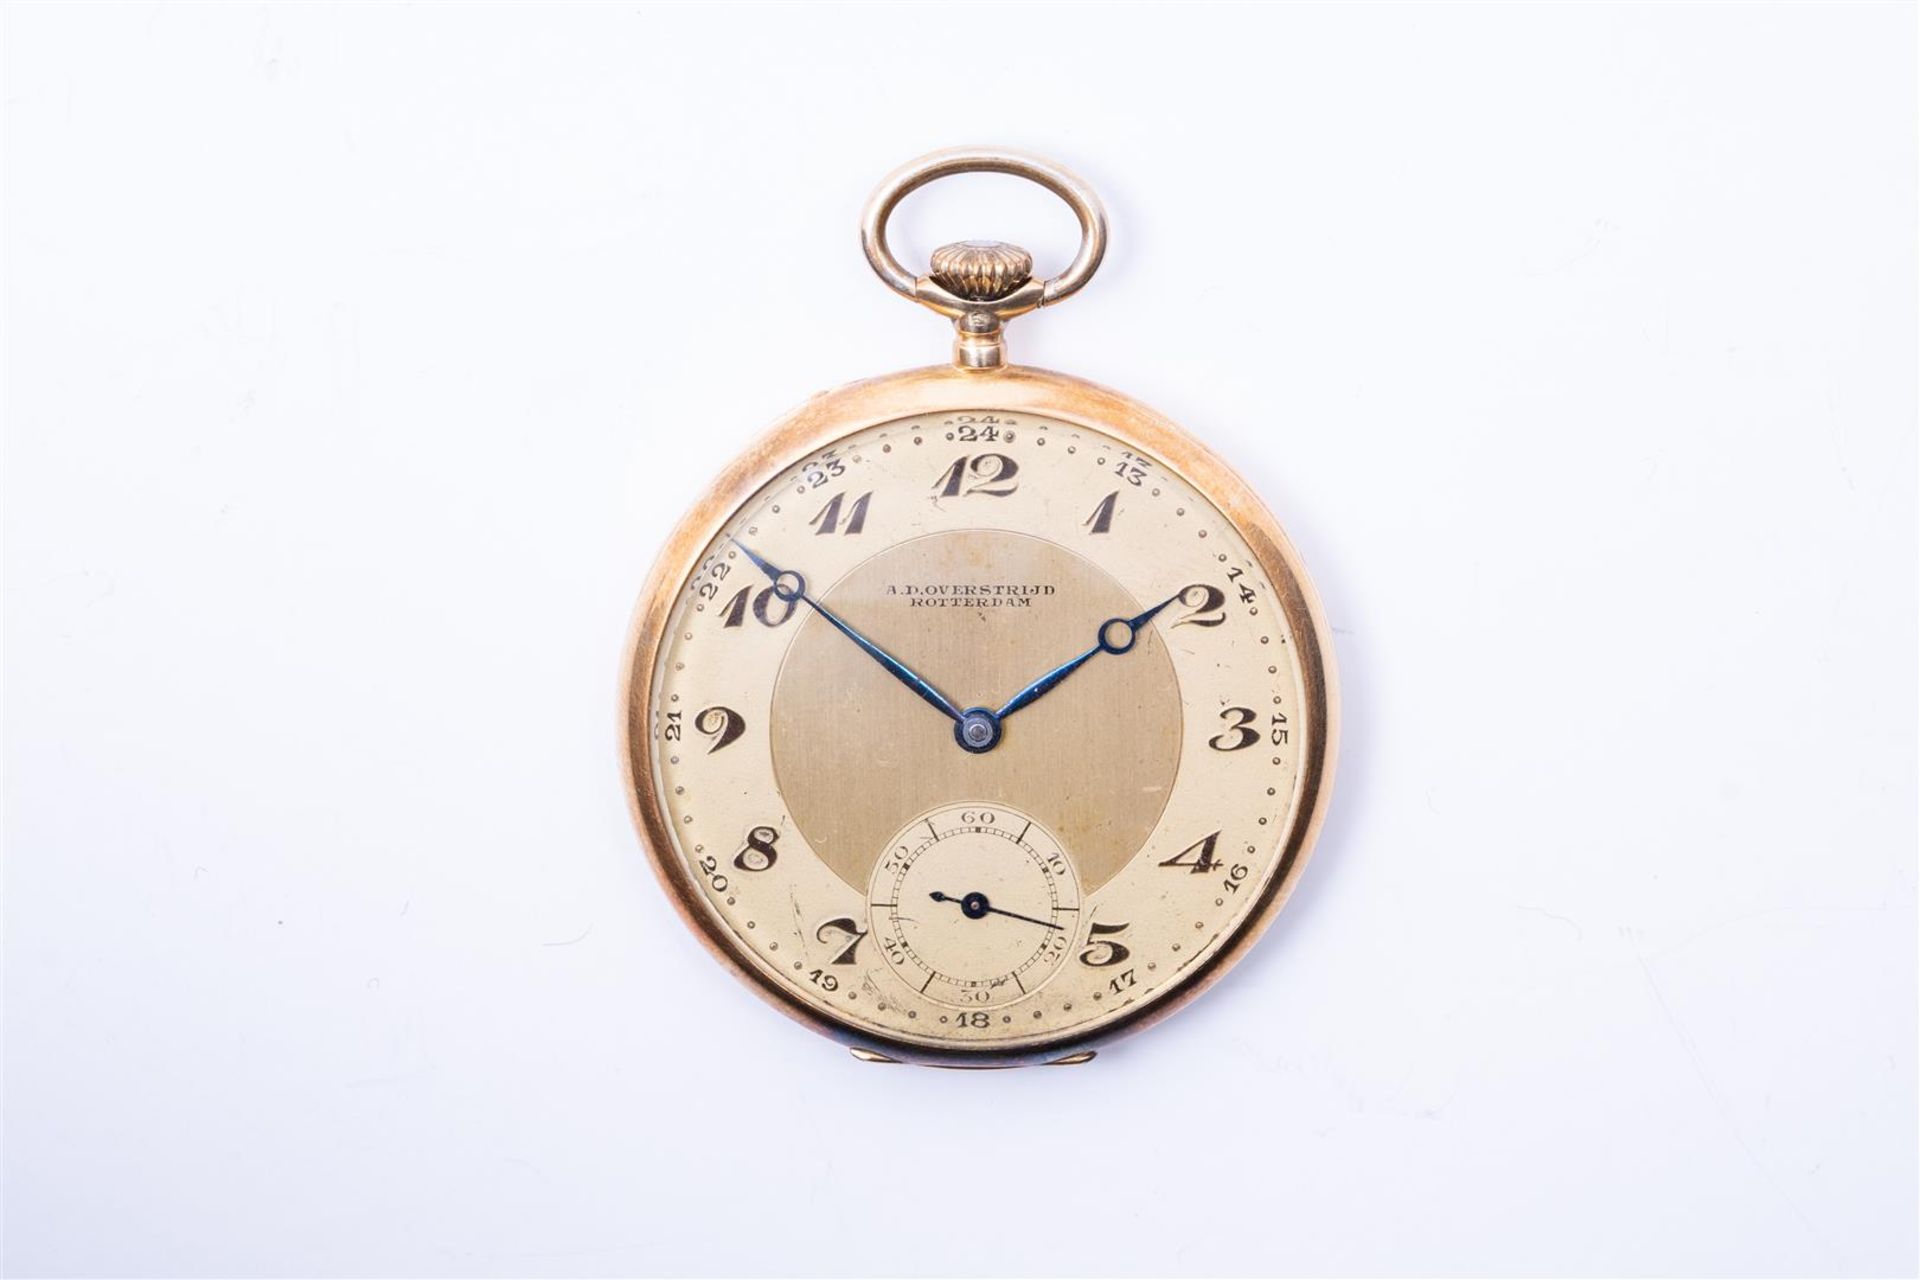 14kt yellow gold pocket watch from the brand A.D. Overstraf Rotterdam.
The watch has been offered in